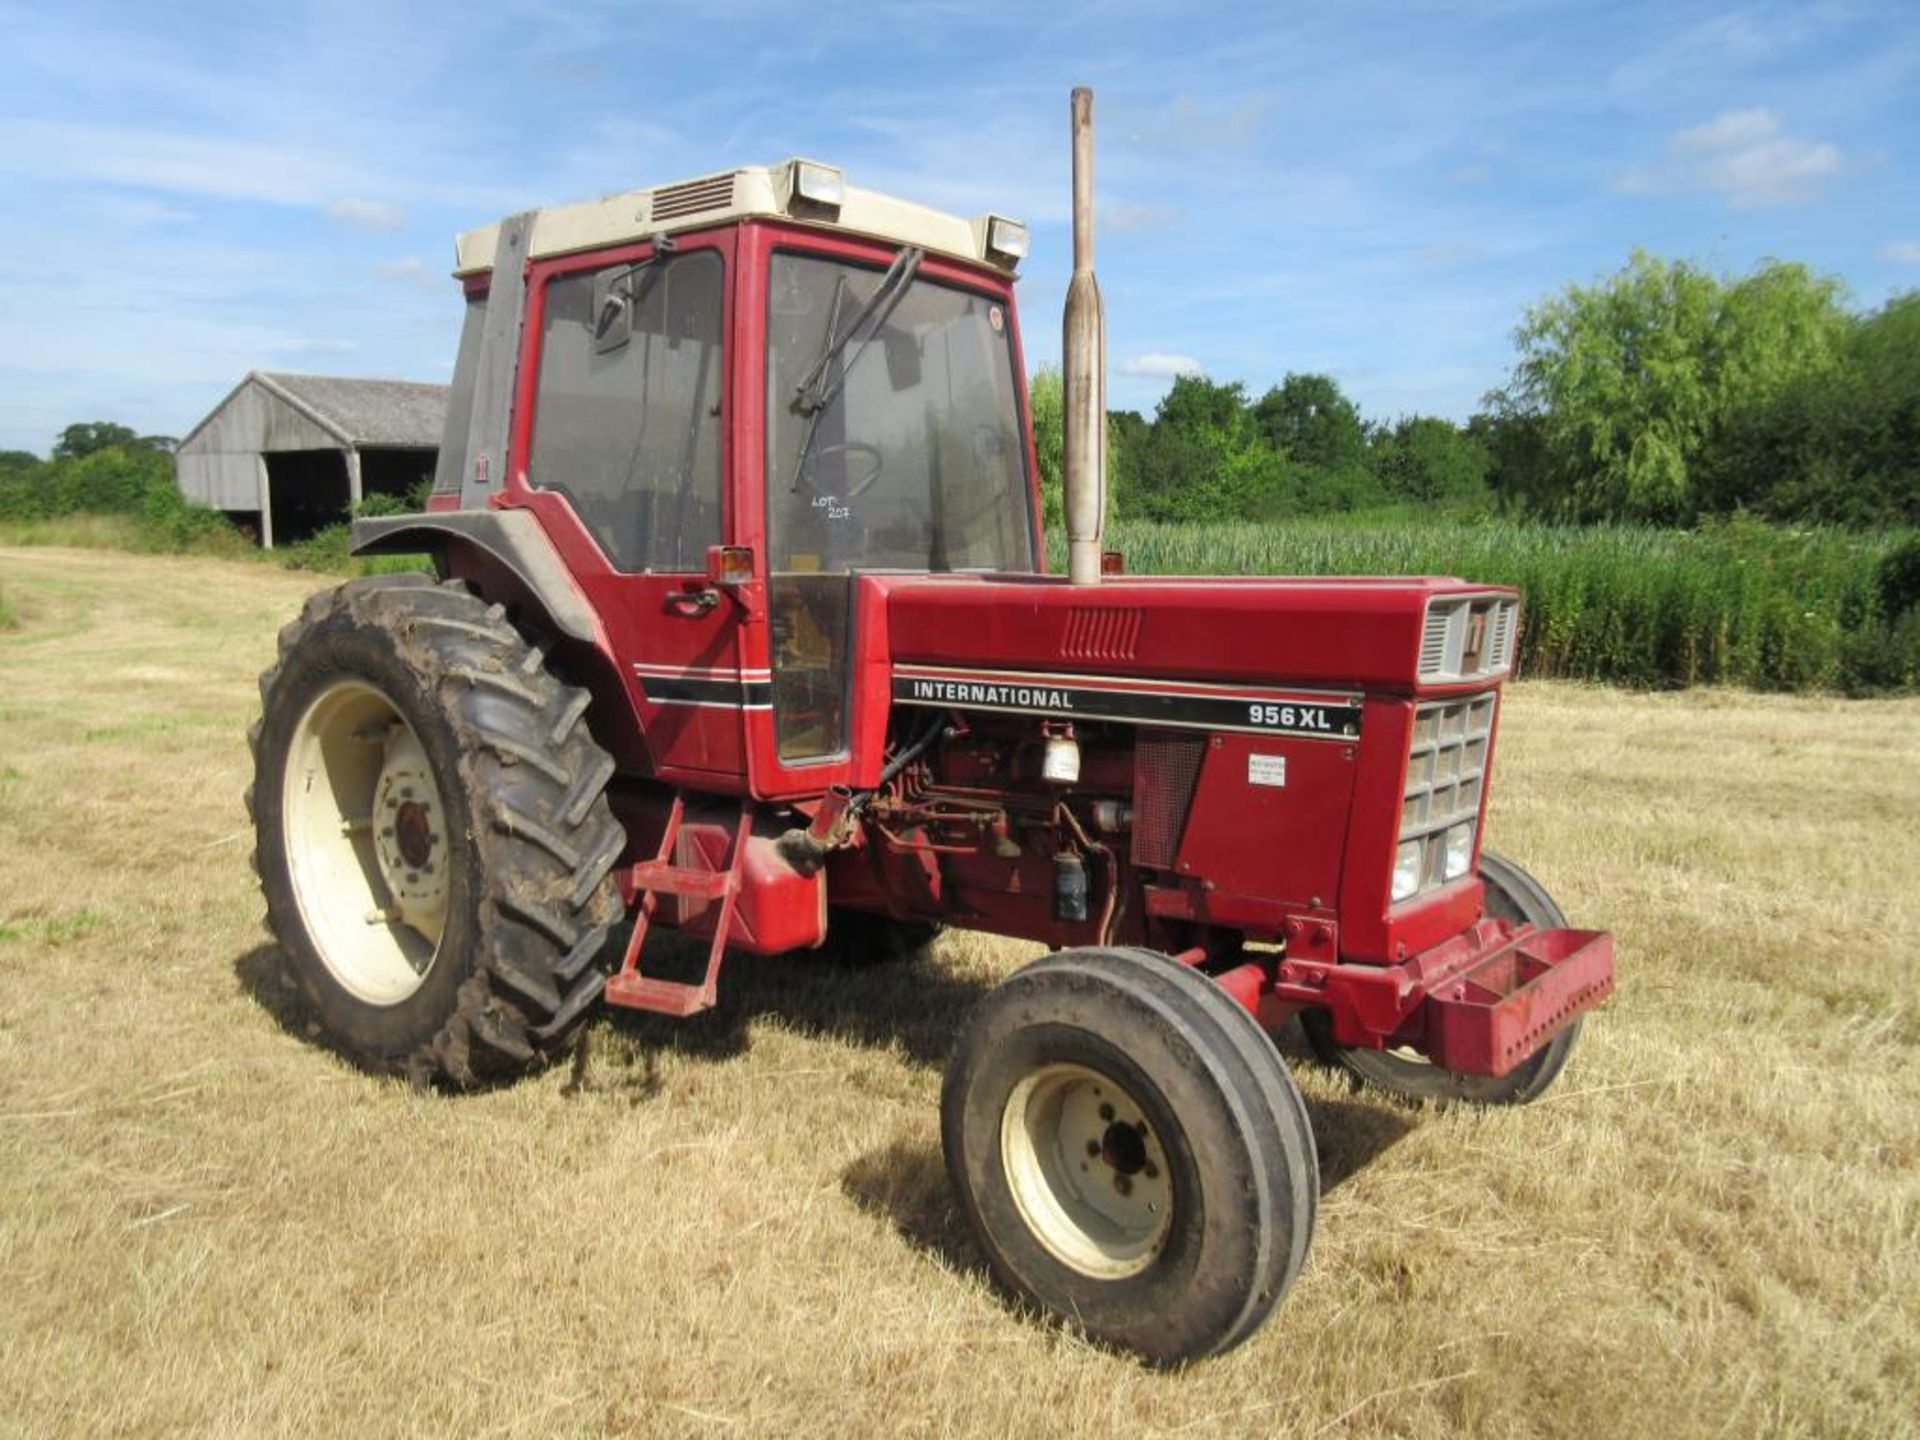 1975 INTERNATIONAL 574 2wd TRACTOR Fitted with IH front loader and bucket, cab, rear linkage, - Image 4 of 5